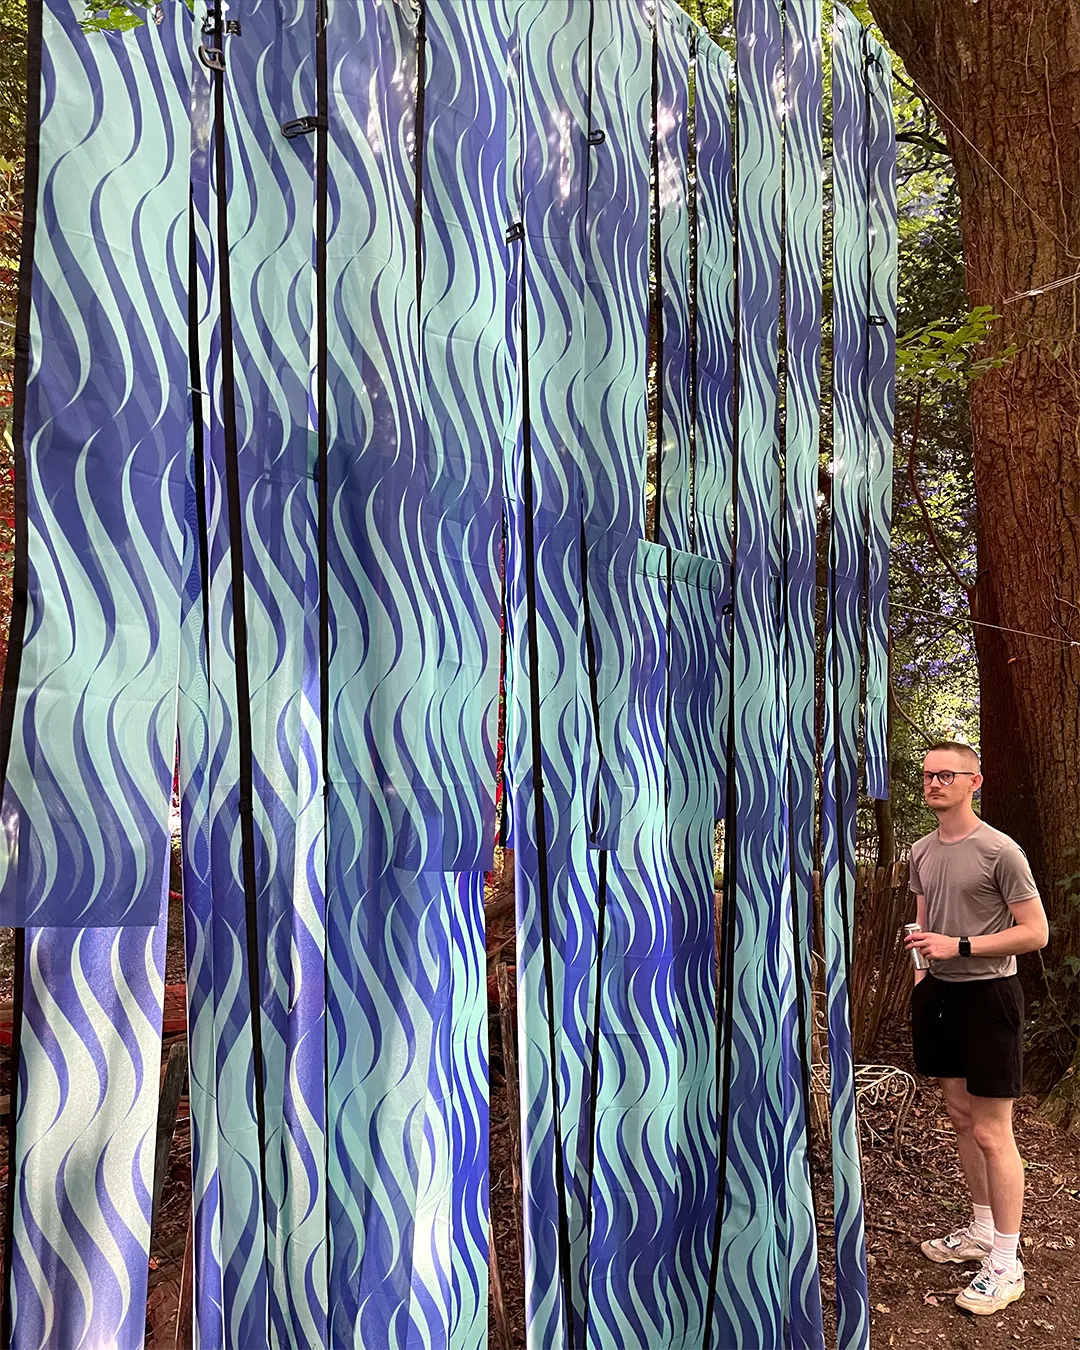 A sculpture in a forest. It is made of long strips of a repeat pattern on flag material. The repeat design is seagreen and ultramarine blue waves. A man stands to the side.